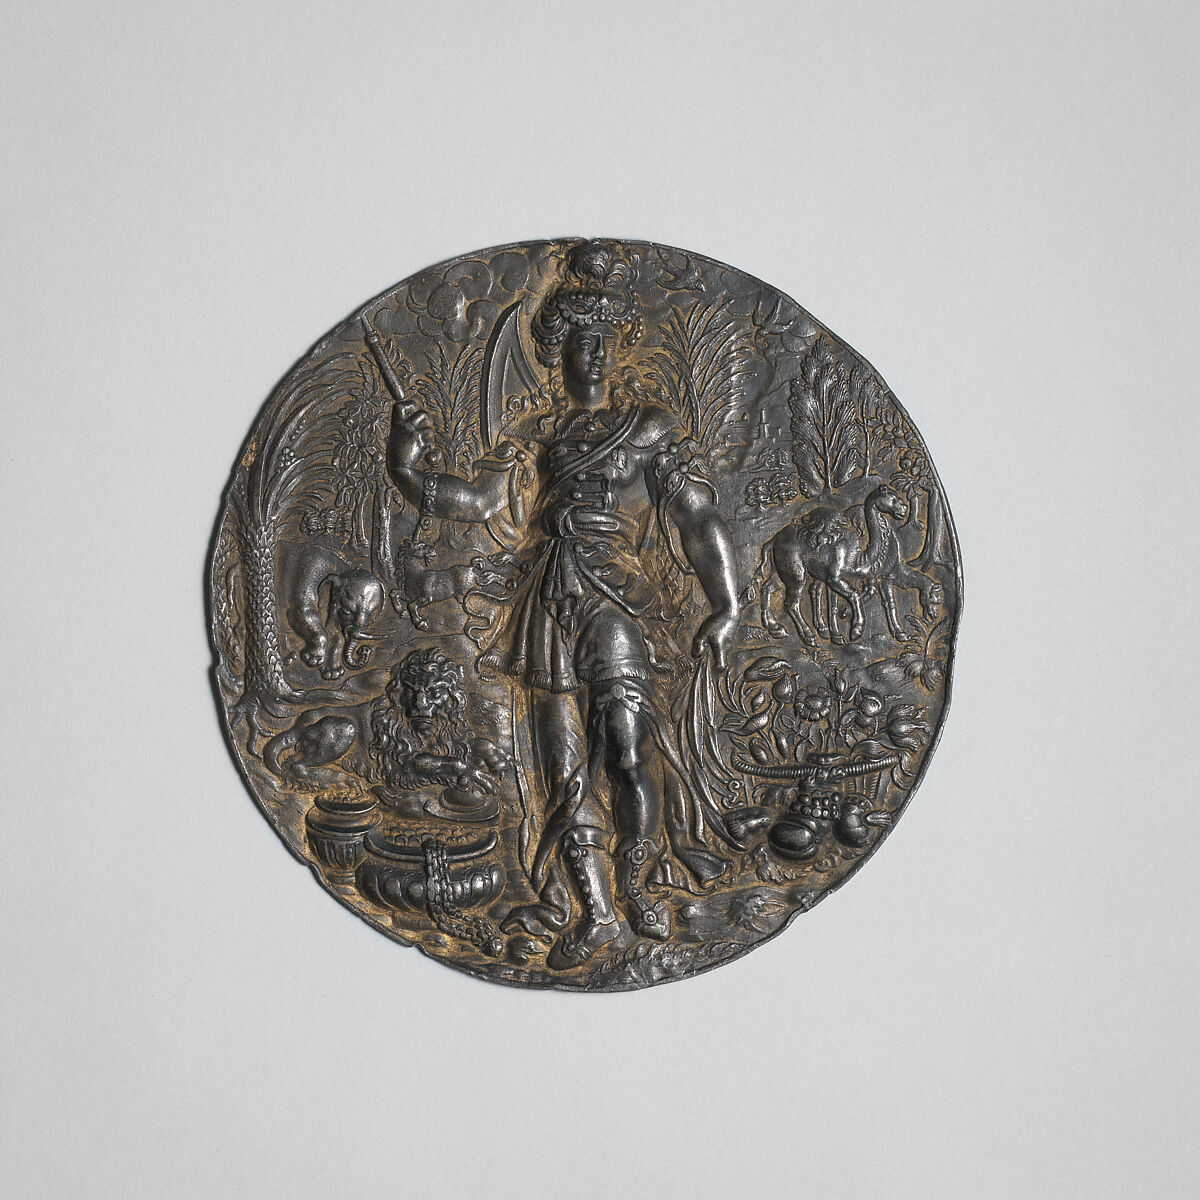 Personification of Asia, Lead and gilding., German